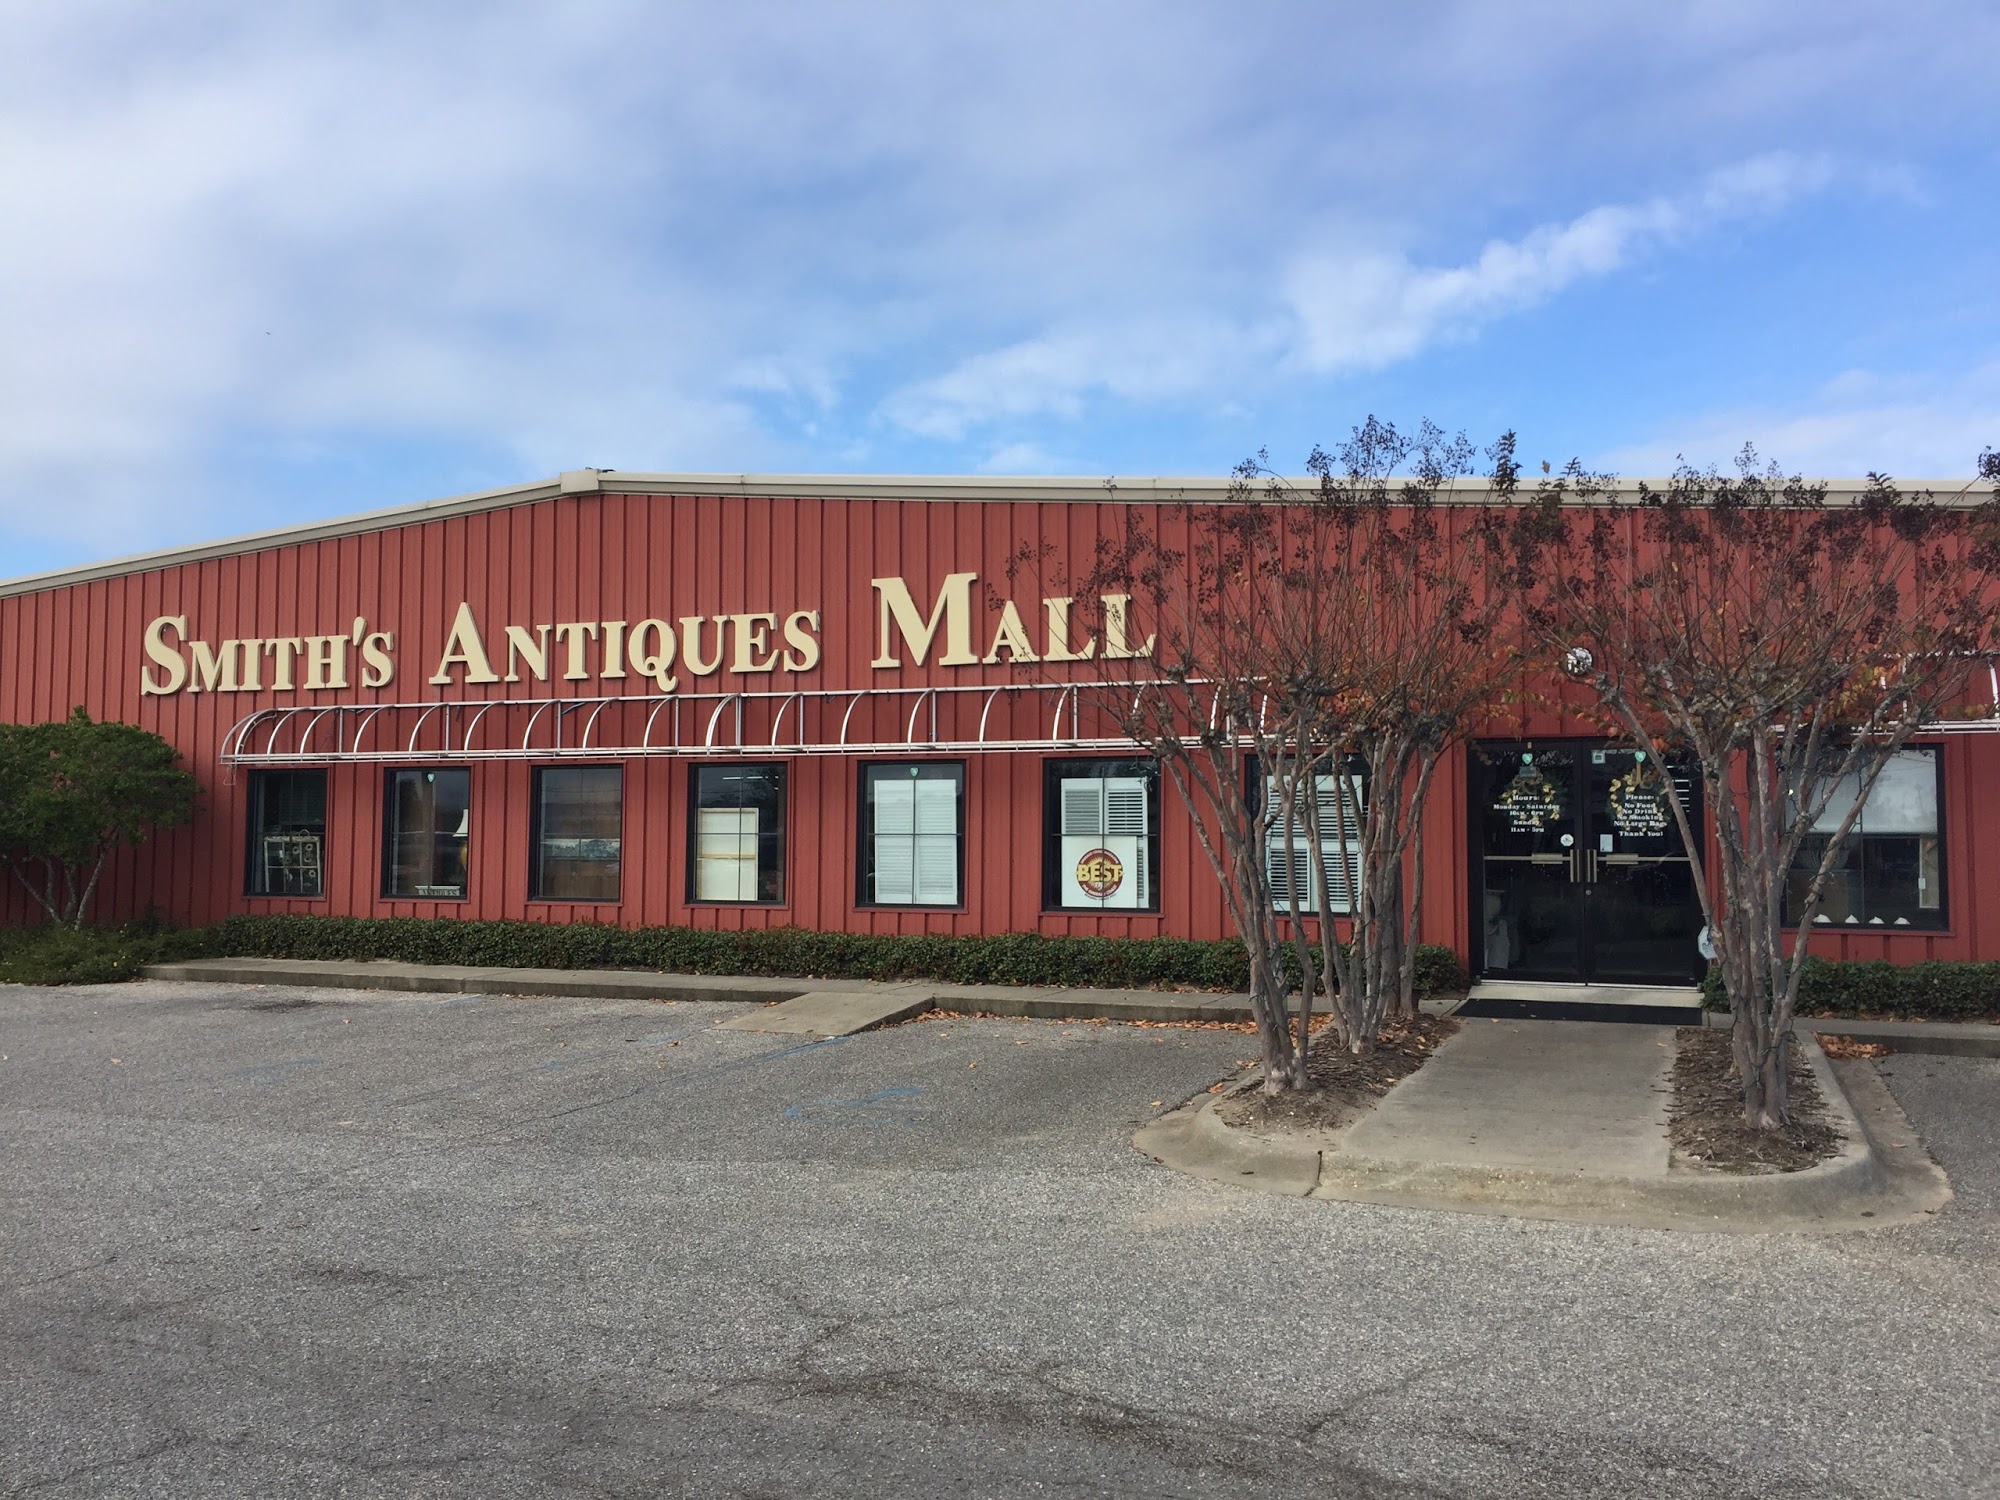 Smith's Antiques Mall